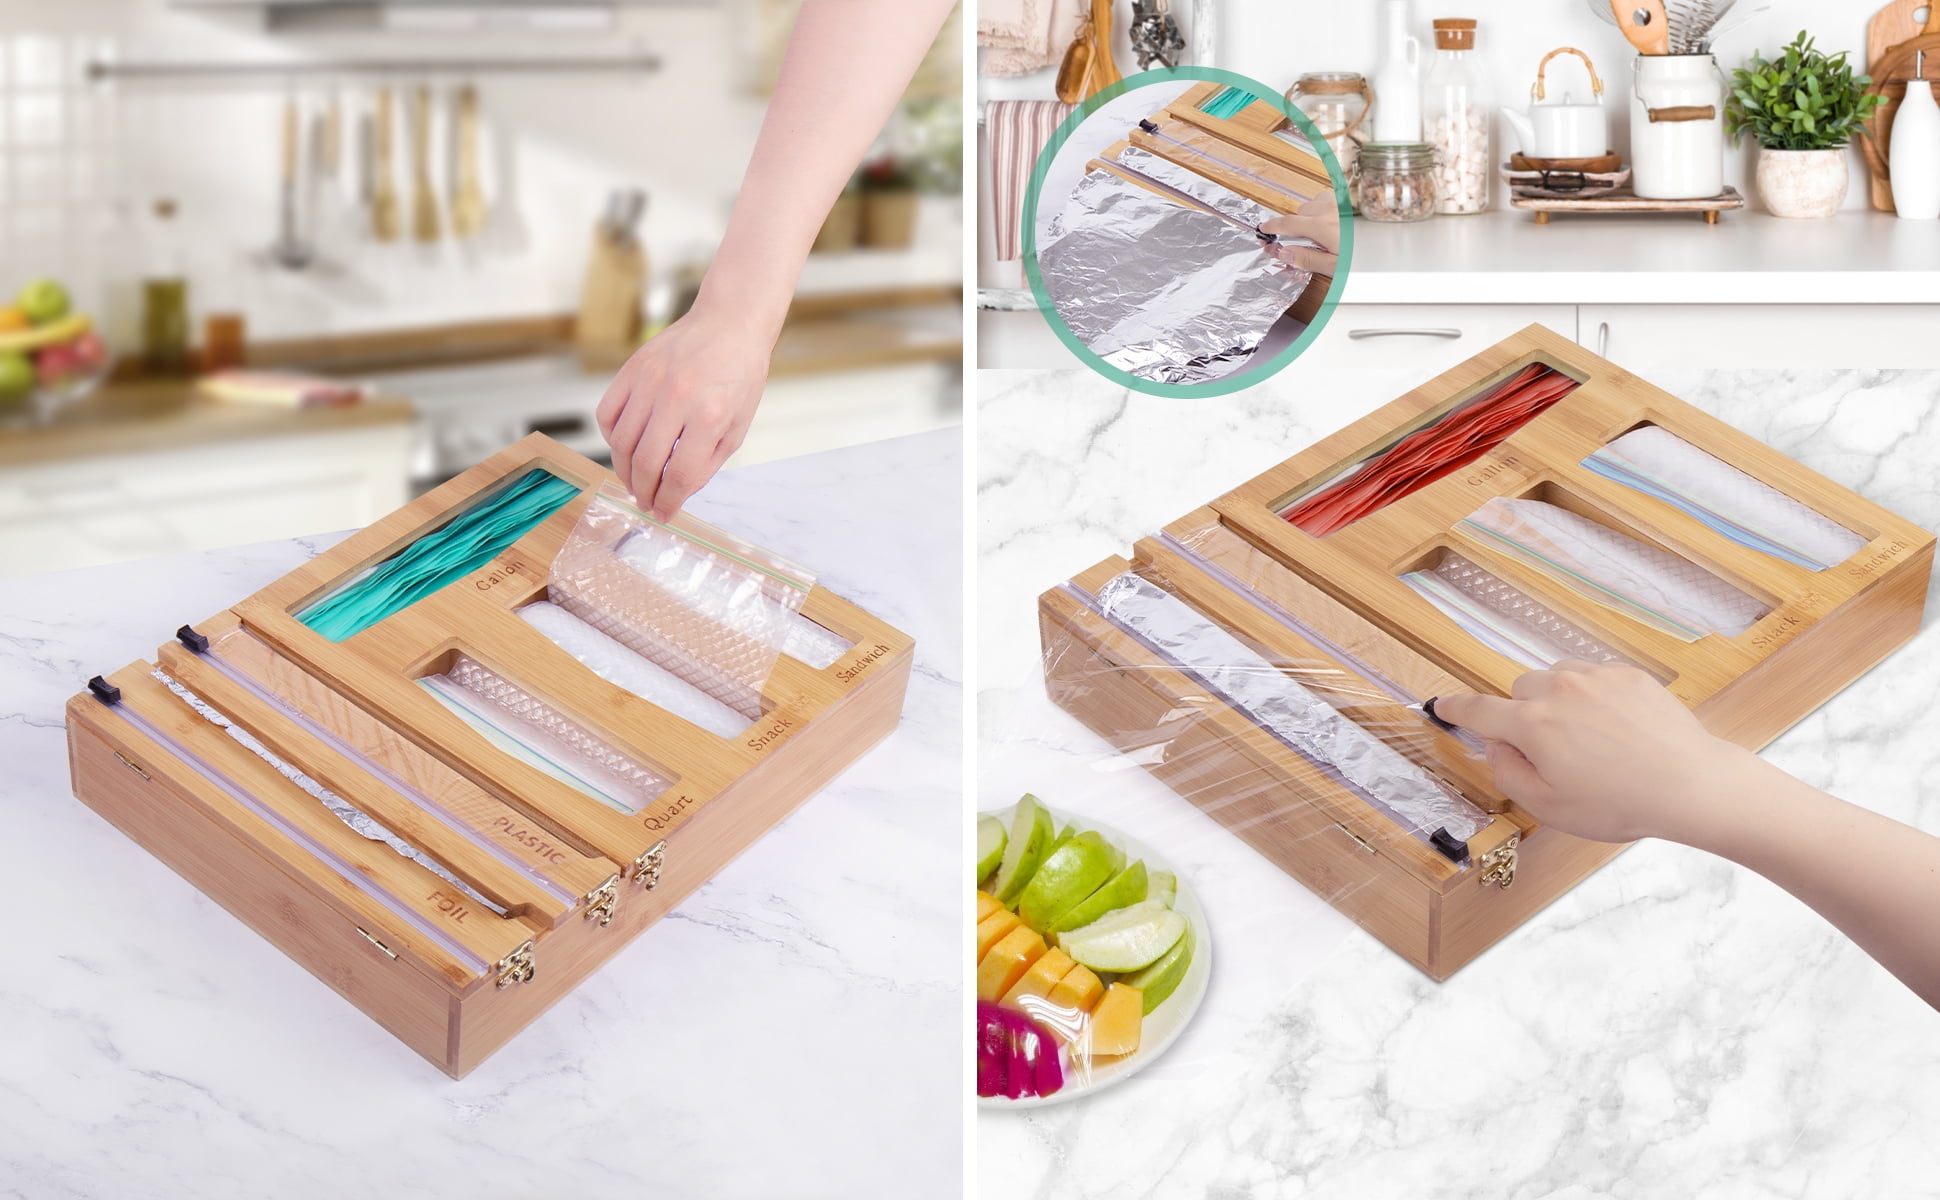  Bamboo Ziplock Bags Organizer for Kitchen Drawer - Food Storage  Plastic Bag Dispenser Holder Containers, Openable Lid Wooden Organization  Box for Gallon Snack Sandwich Quart Variety Size Baggies : Home 